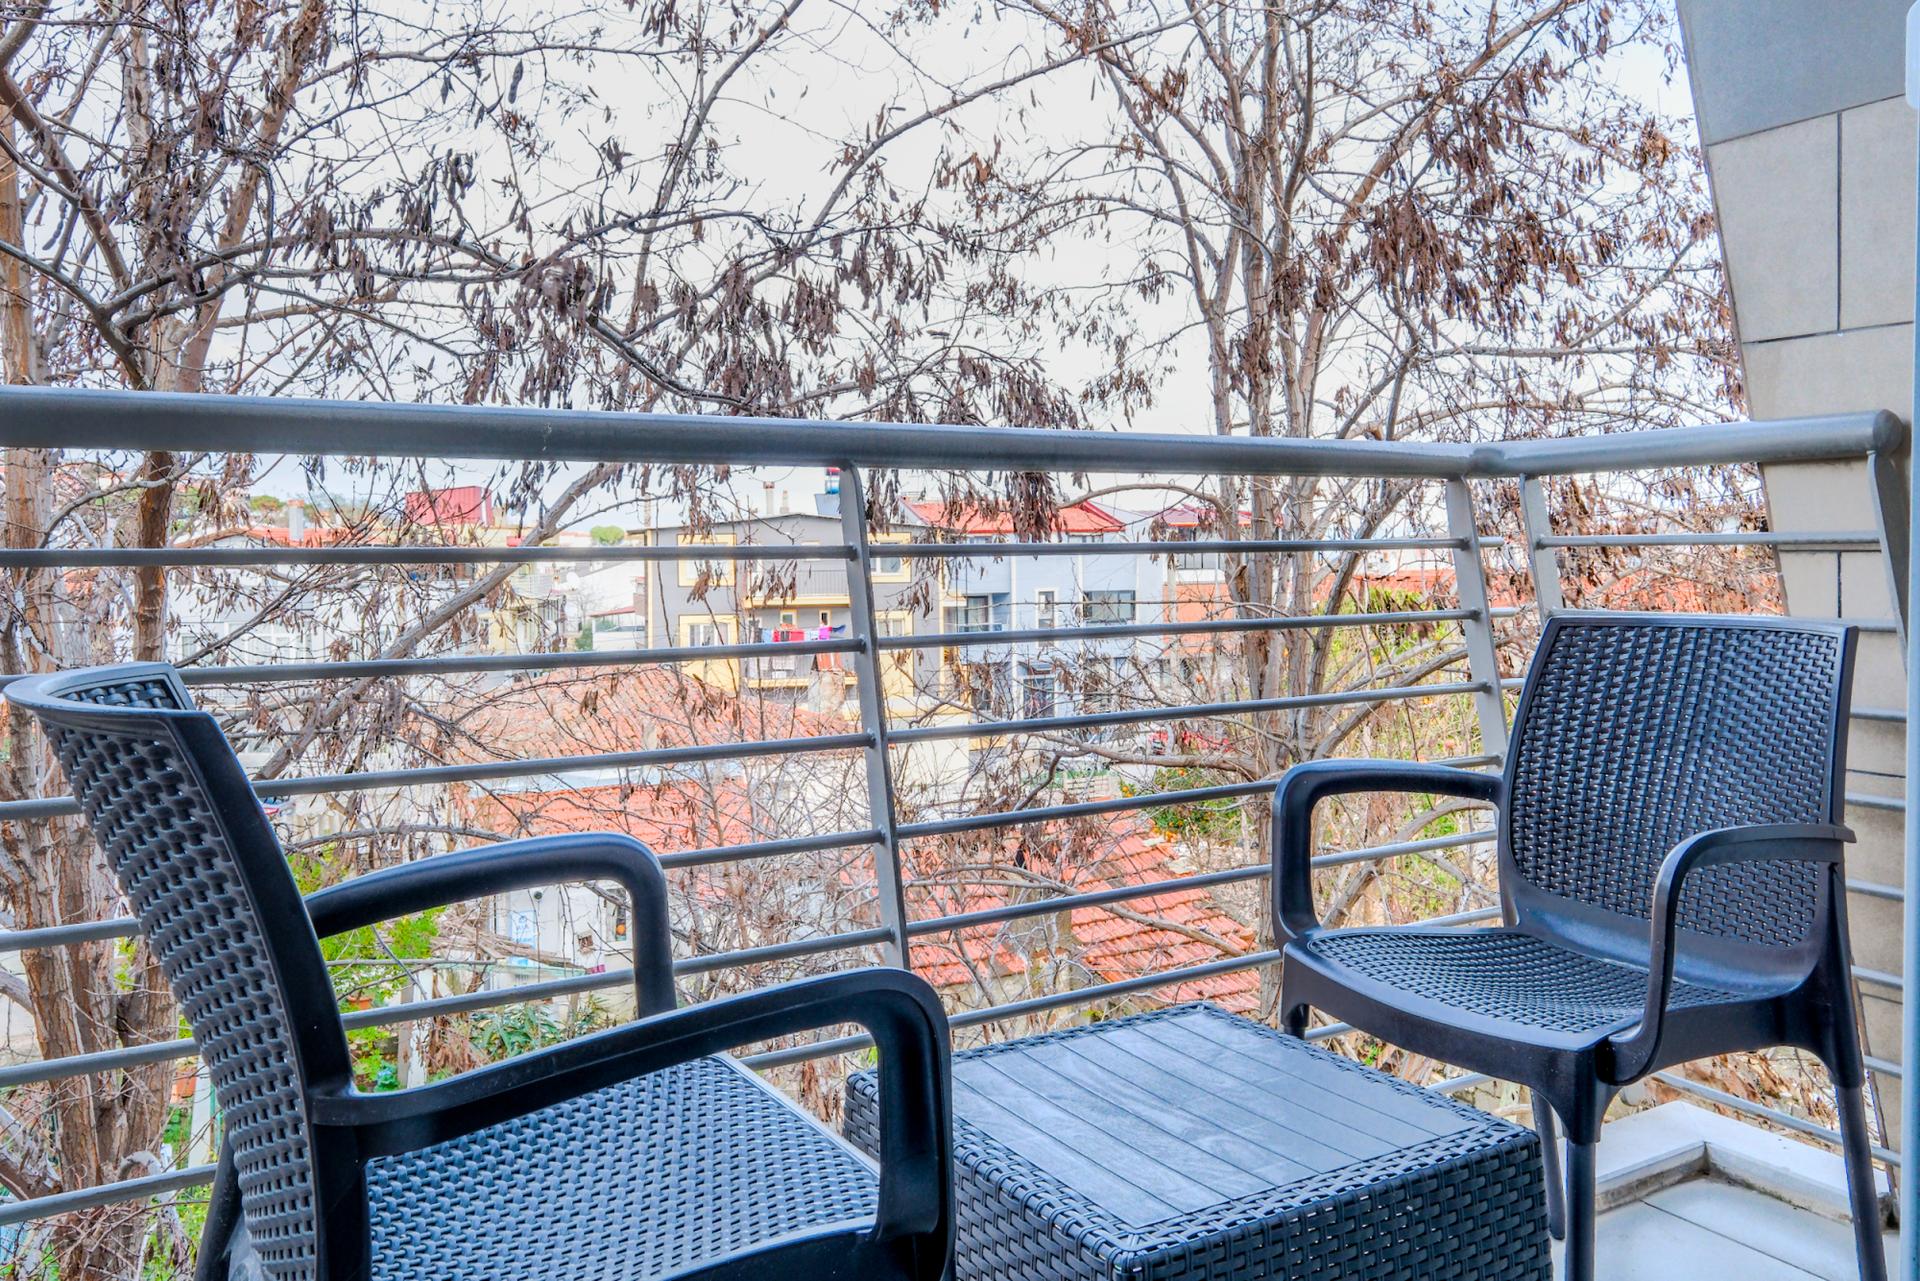 A serene balcony space, offering a breath of fresh air and a stunning view, an ideal spot for relaxation and contemplation.